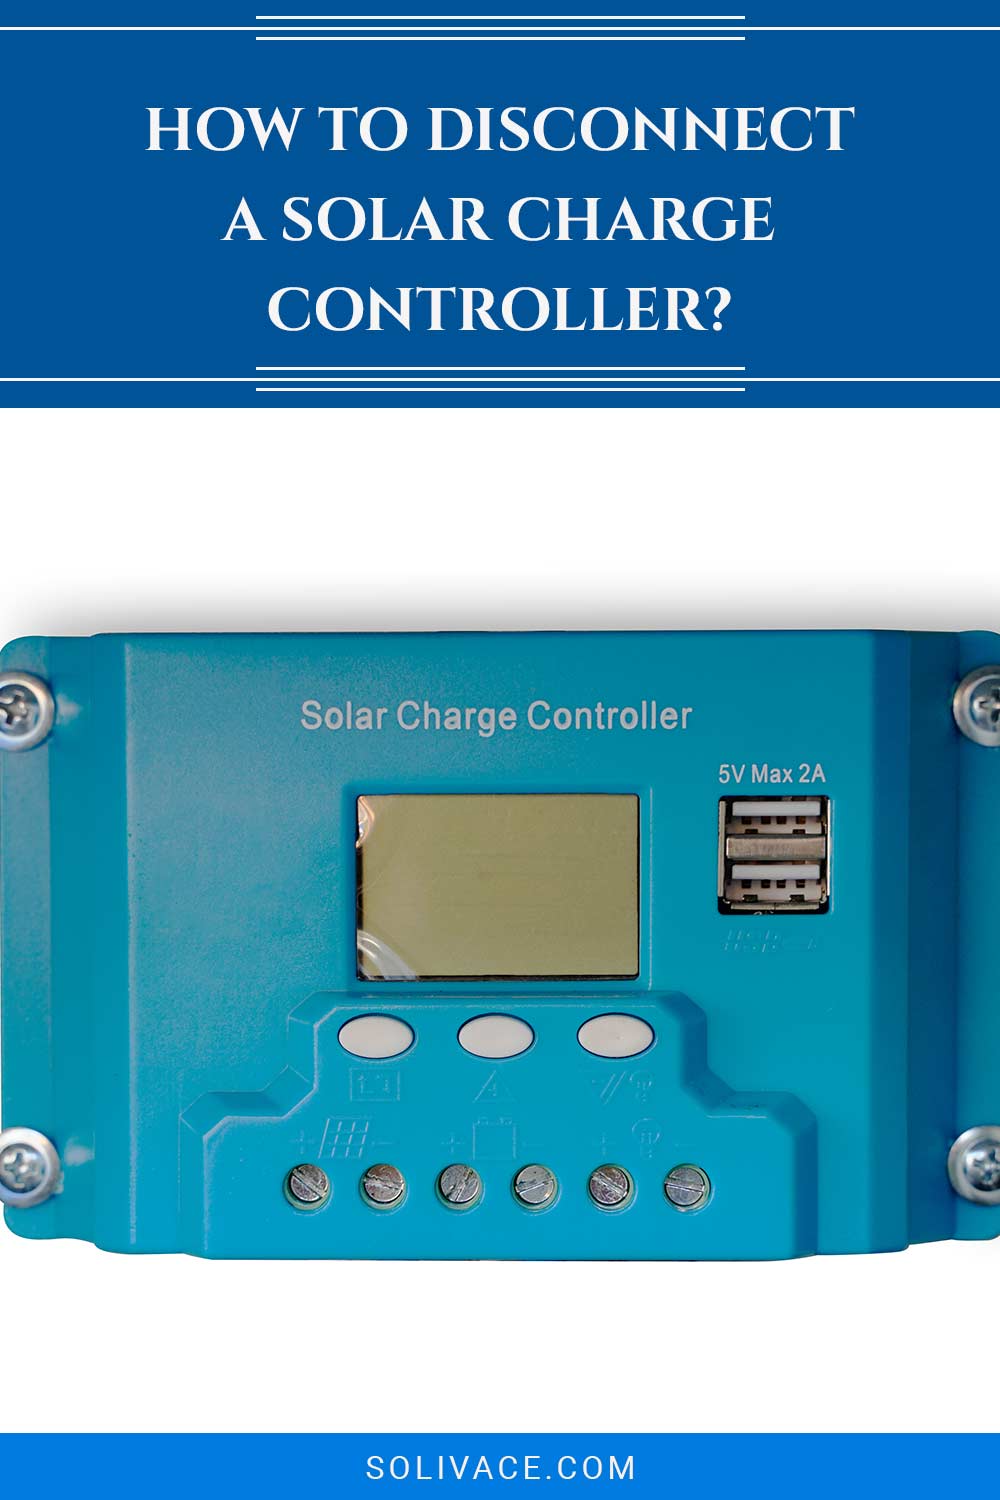 How To Disconnect A Solar Charge Controller?